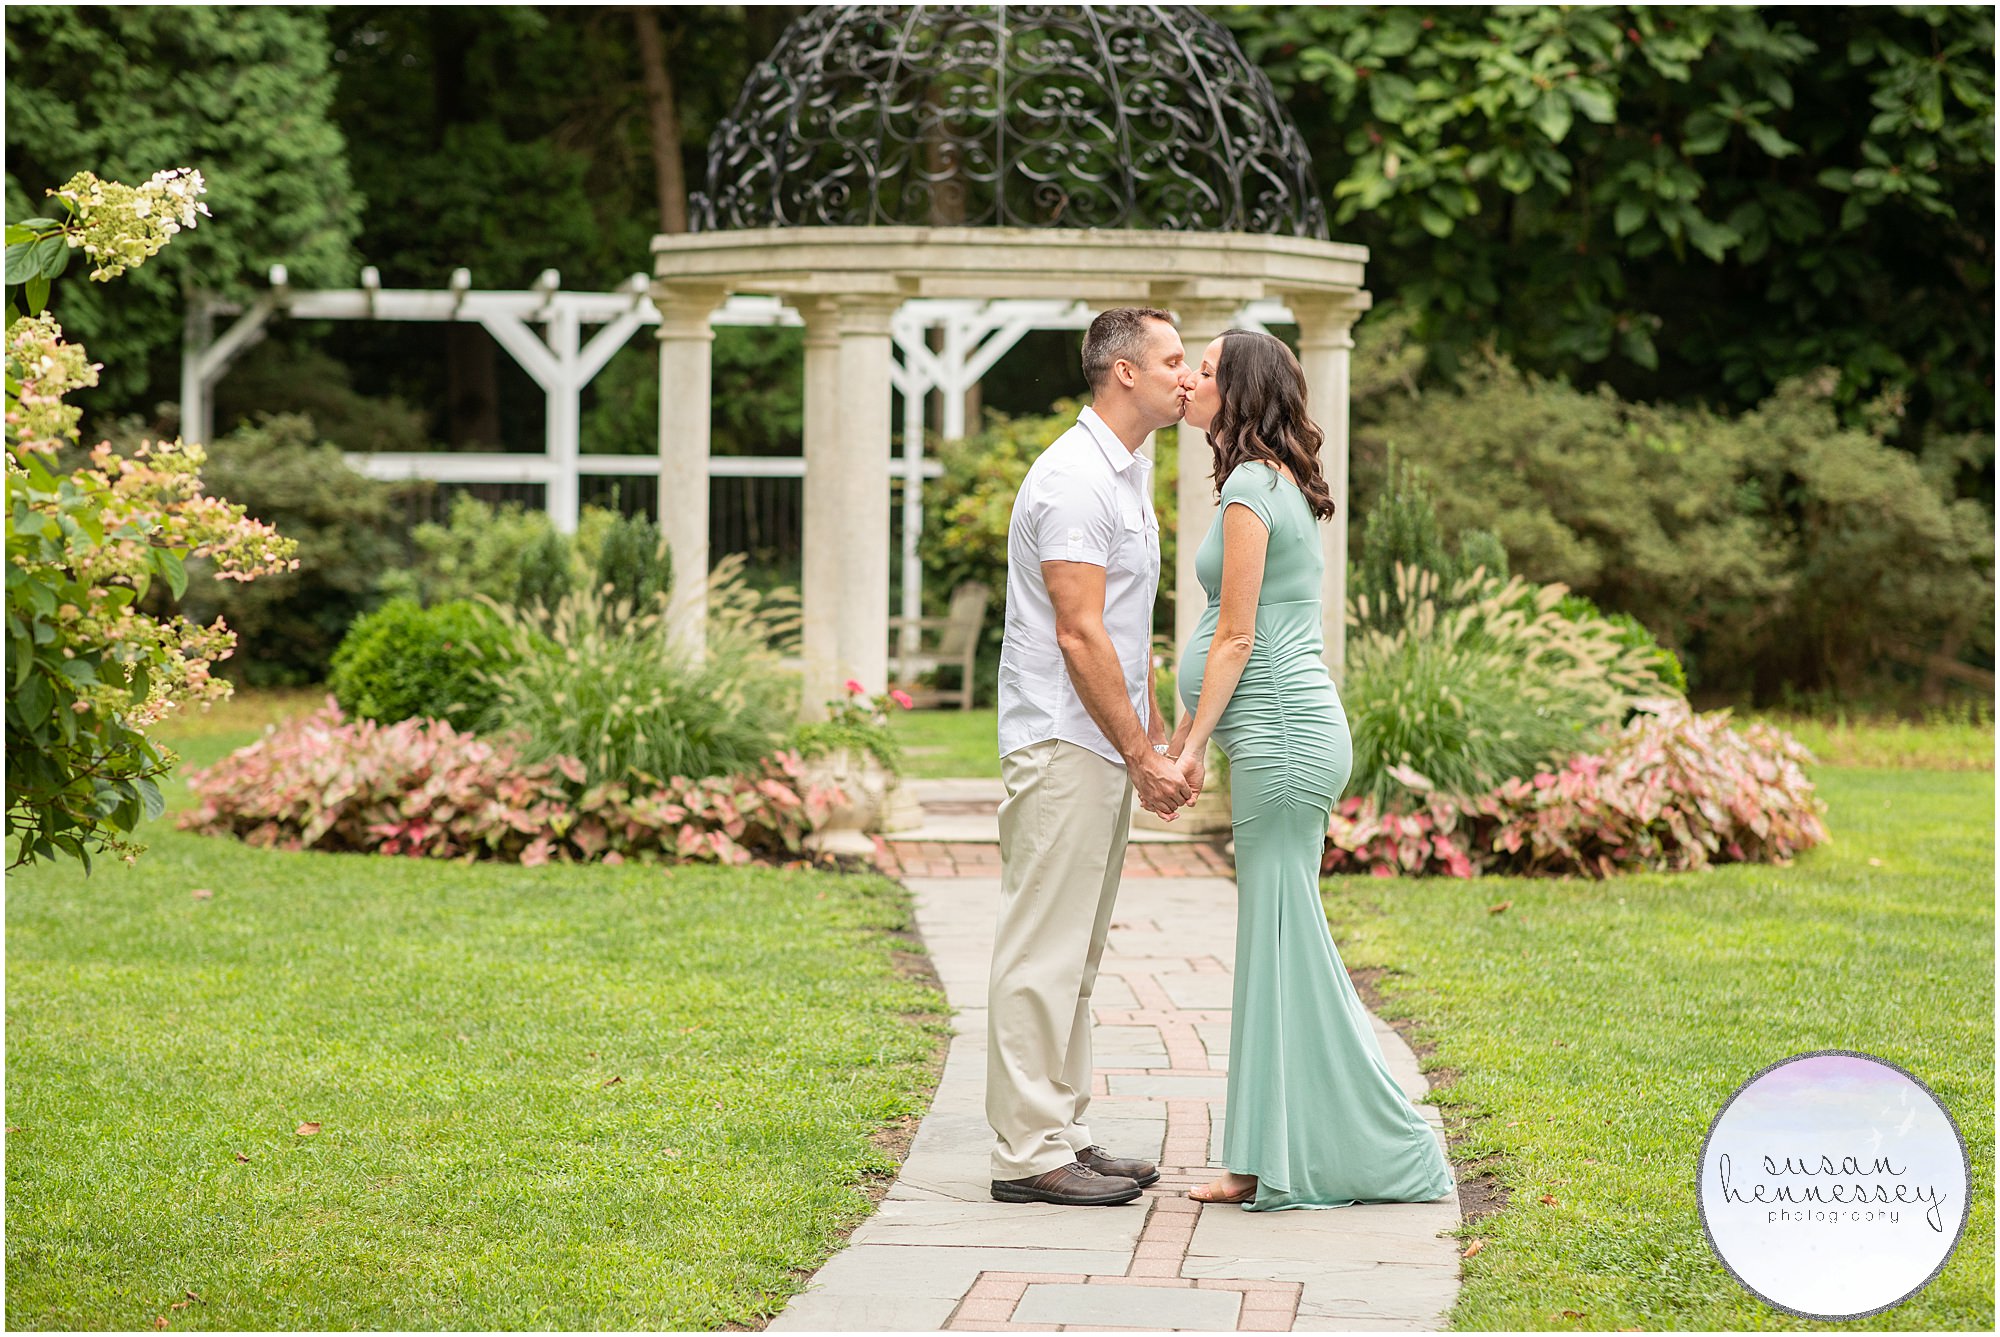 An expectant couple kiss at their maternity session